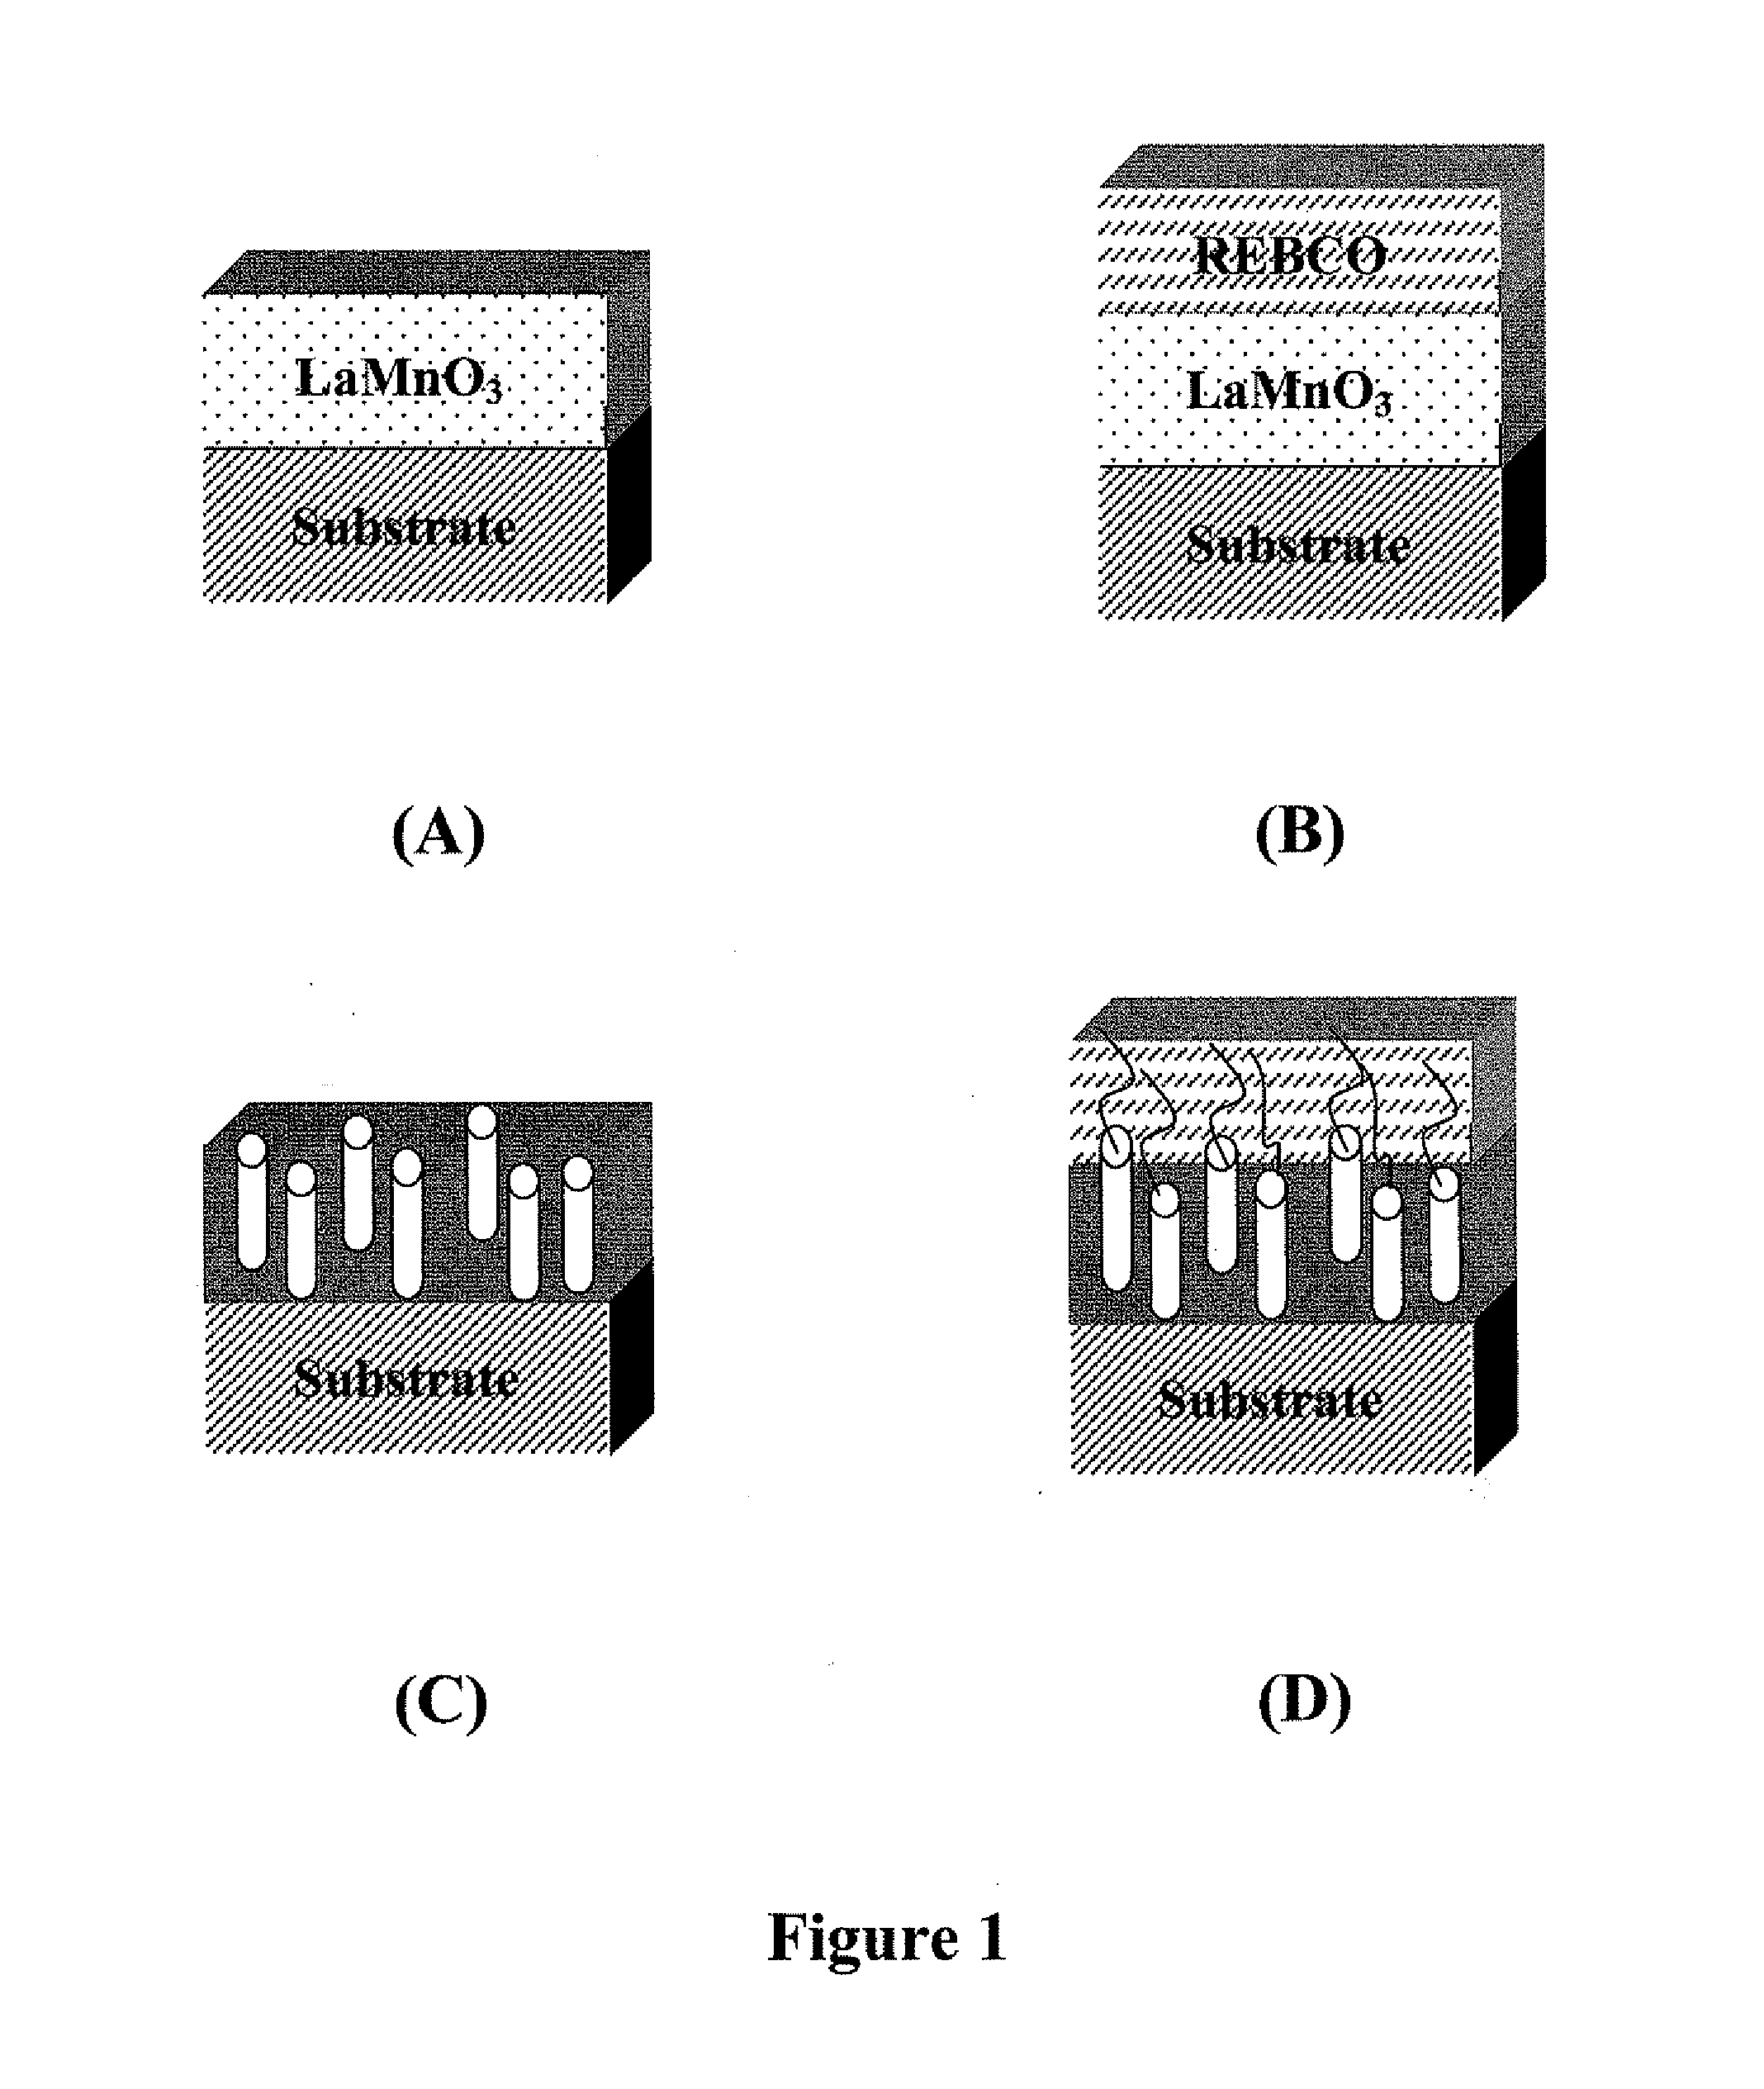 Method for producing microstructured templates and their use in providing pinning enhancements in superconducting films deposited thereon